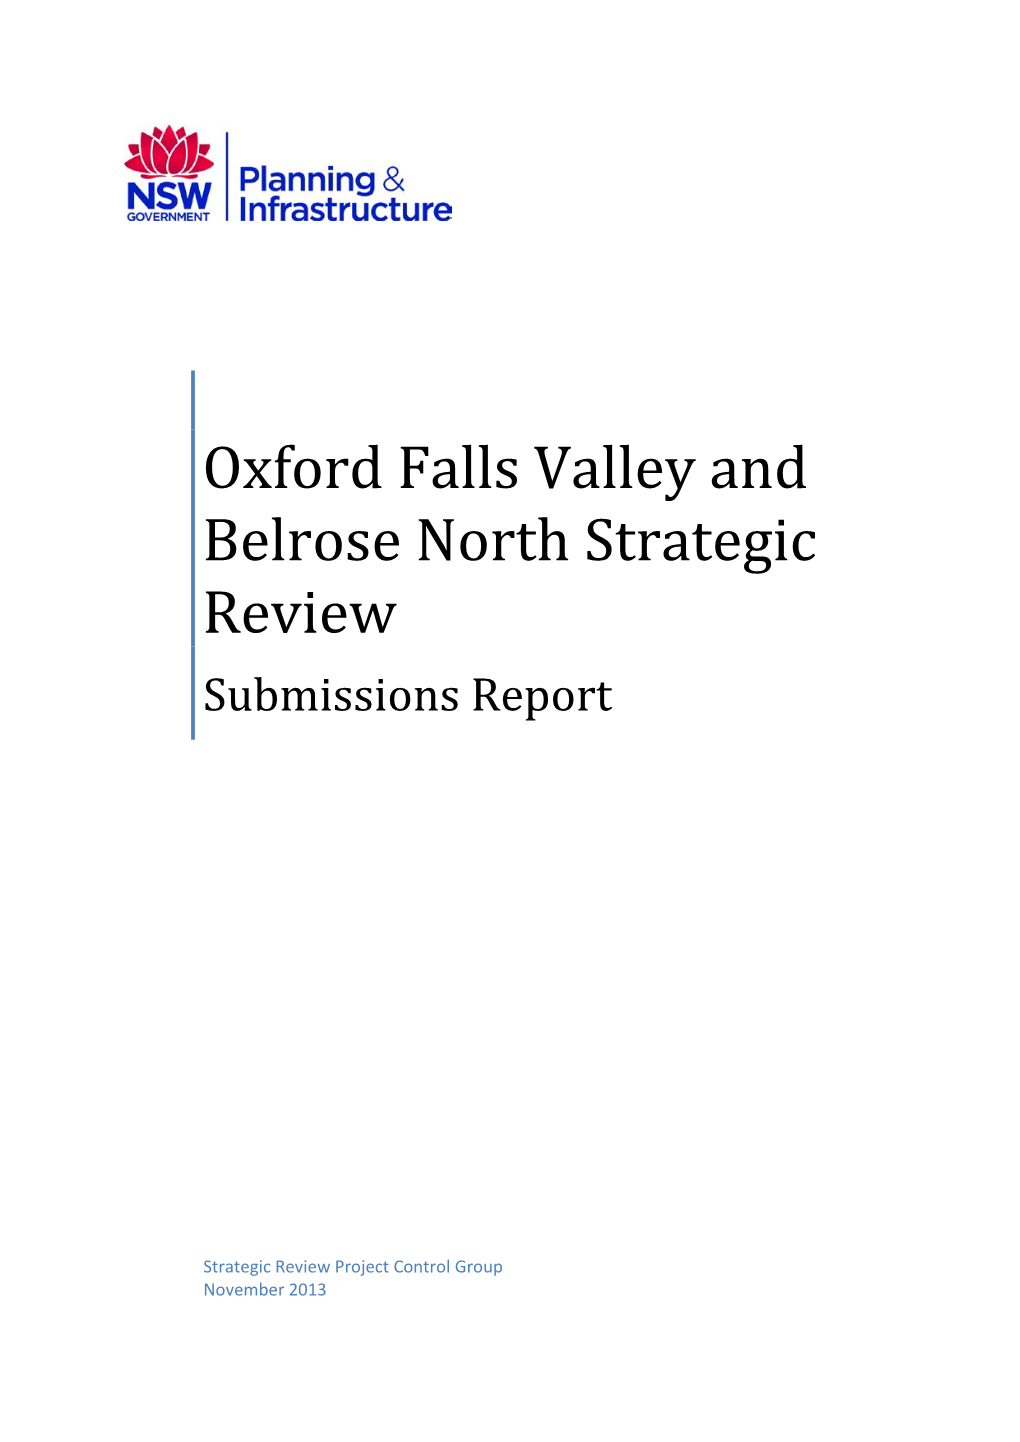 Oxford Falls Valley and Belrose North Strategic Review